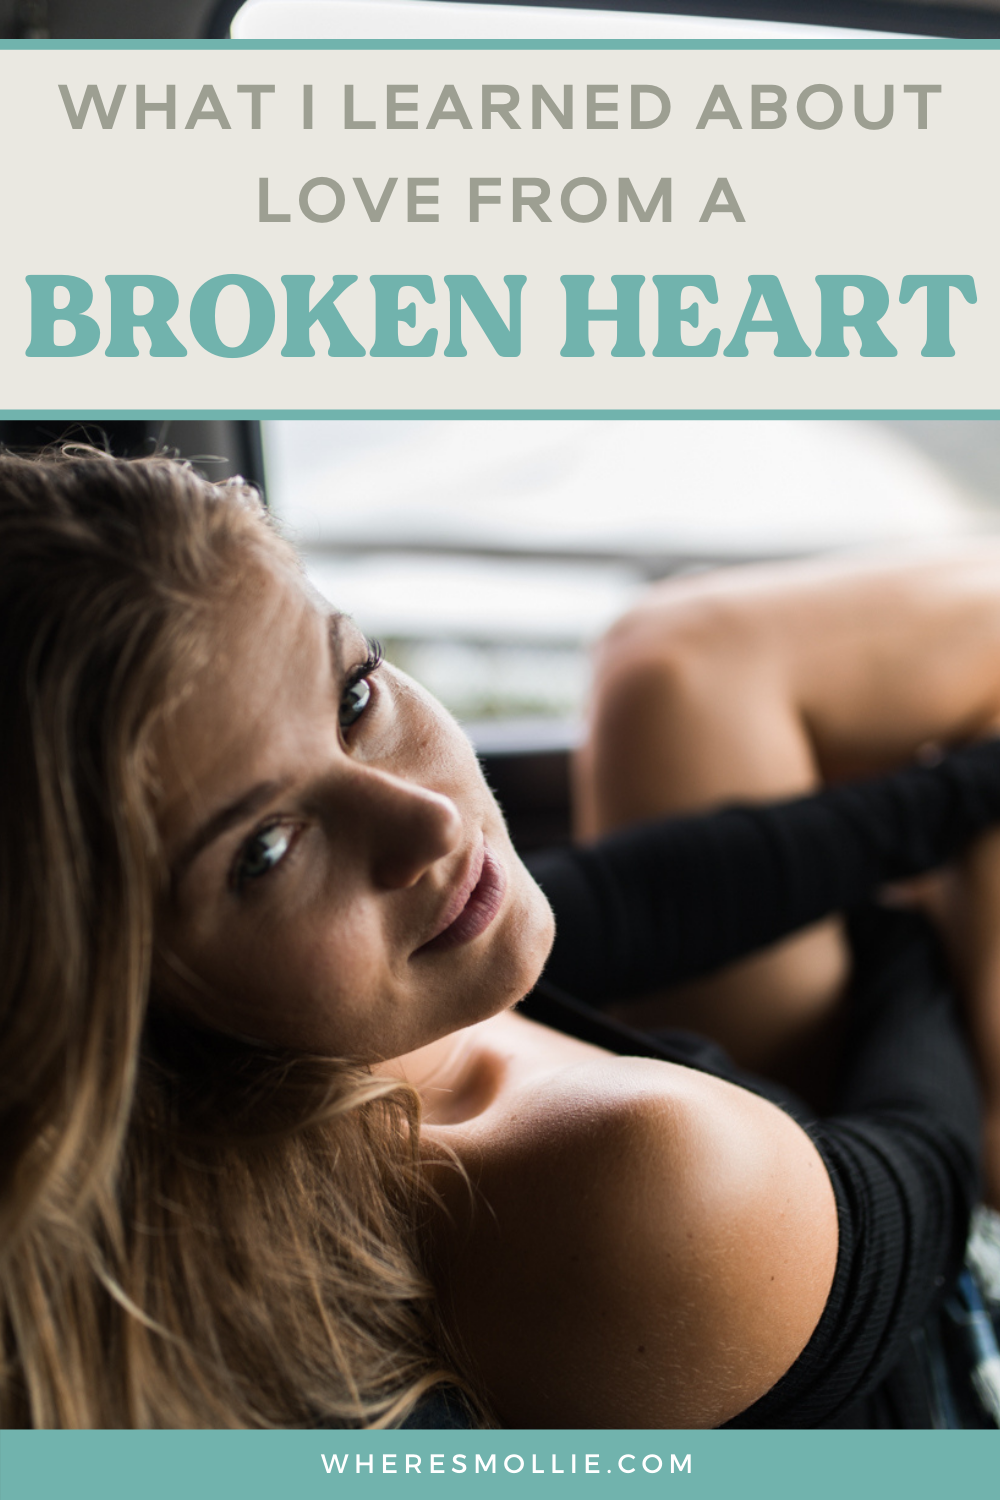 11 things I learned about love from a broken heart